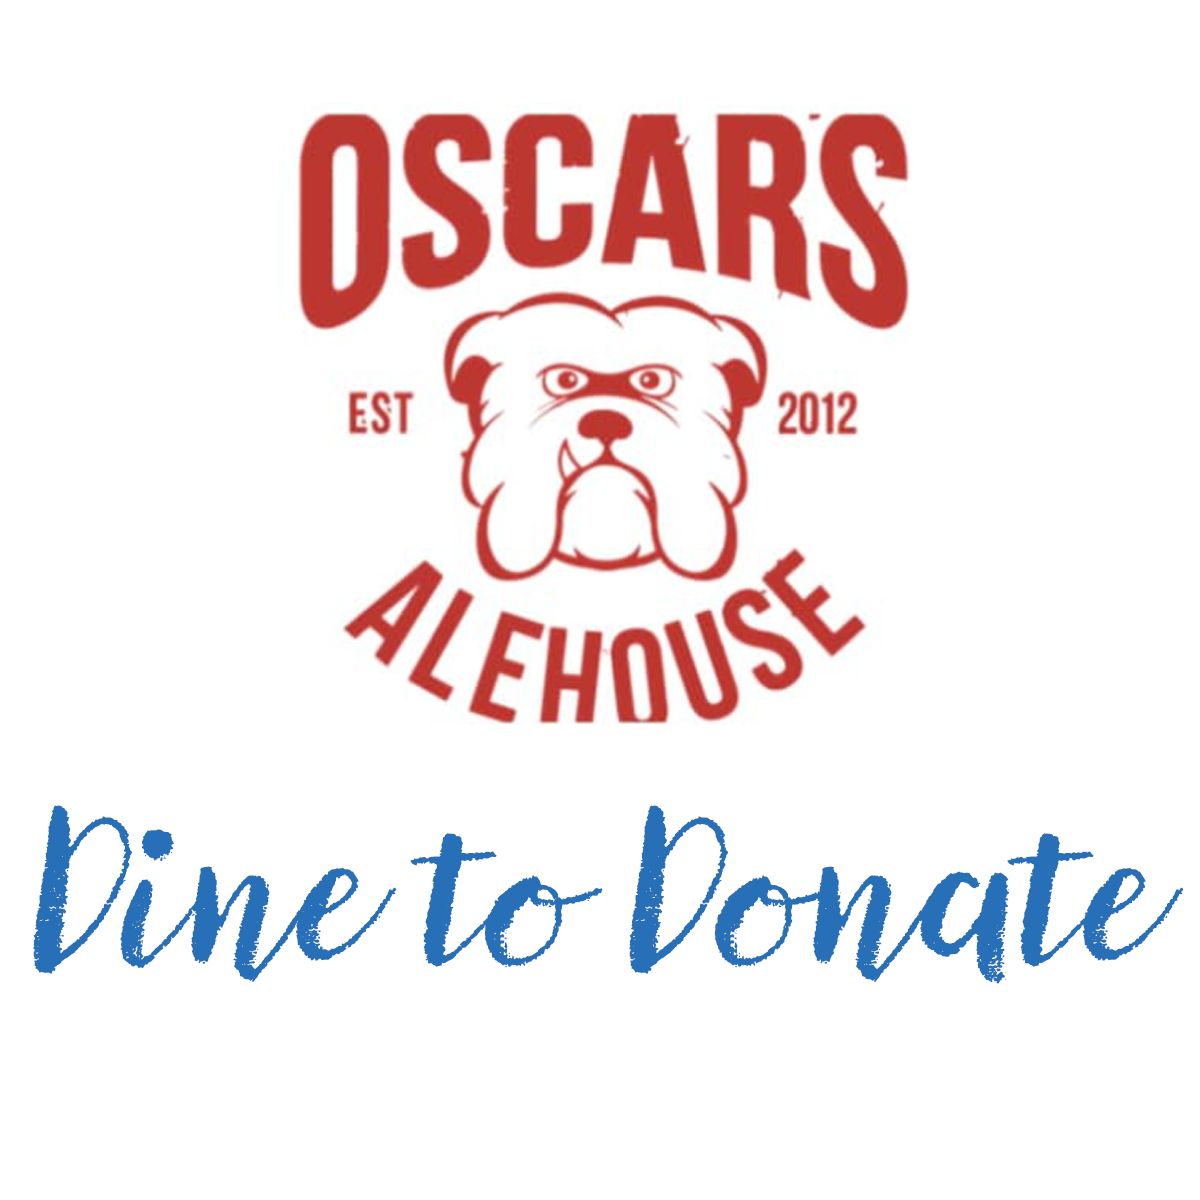 Brenna Strong Dine to Donate at Oscar's Alehouse